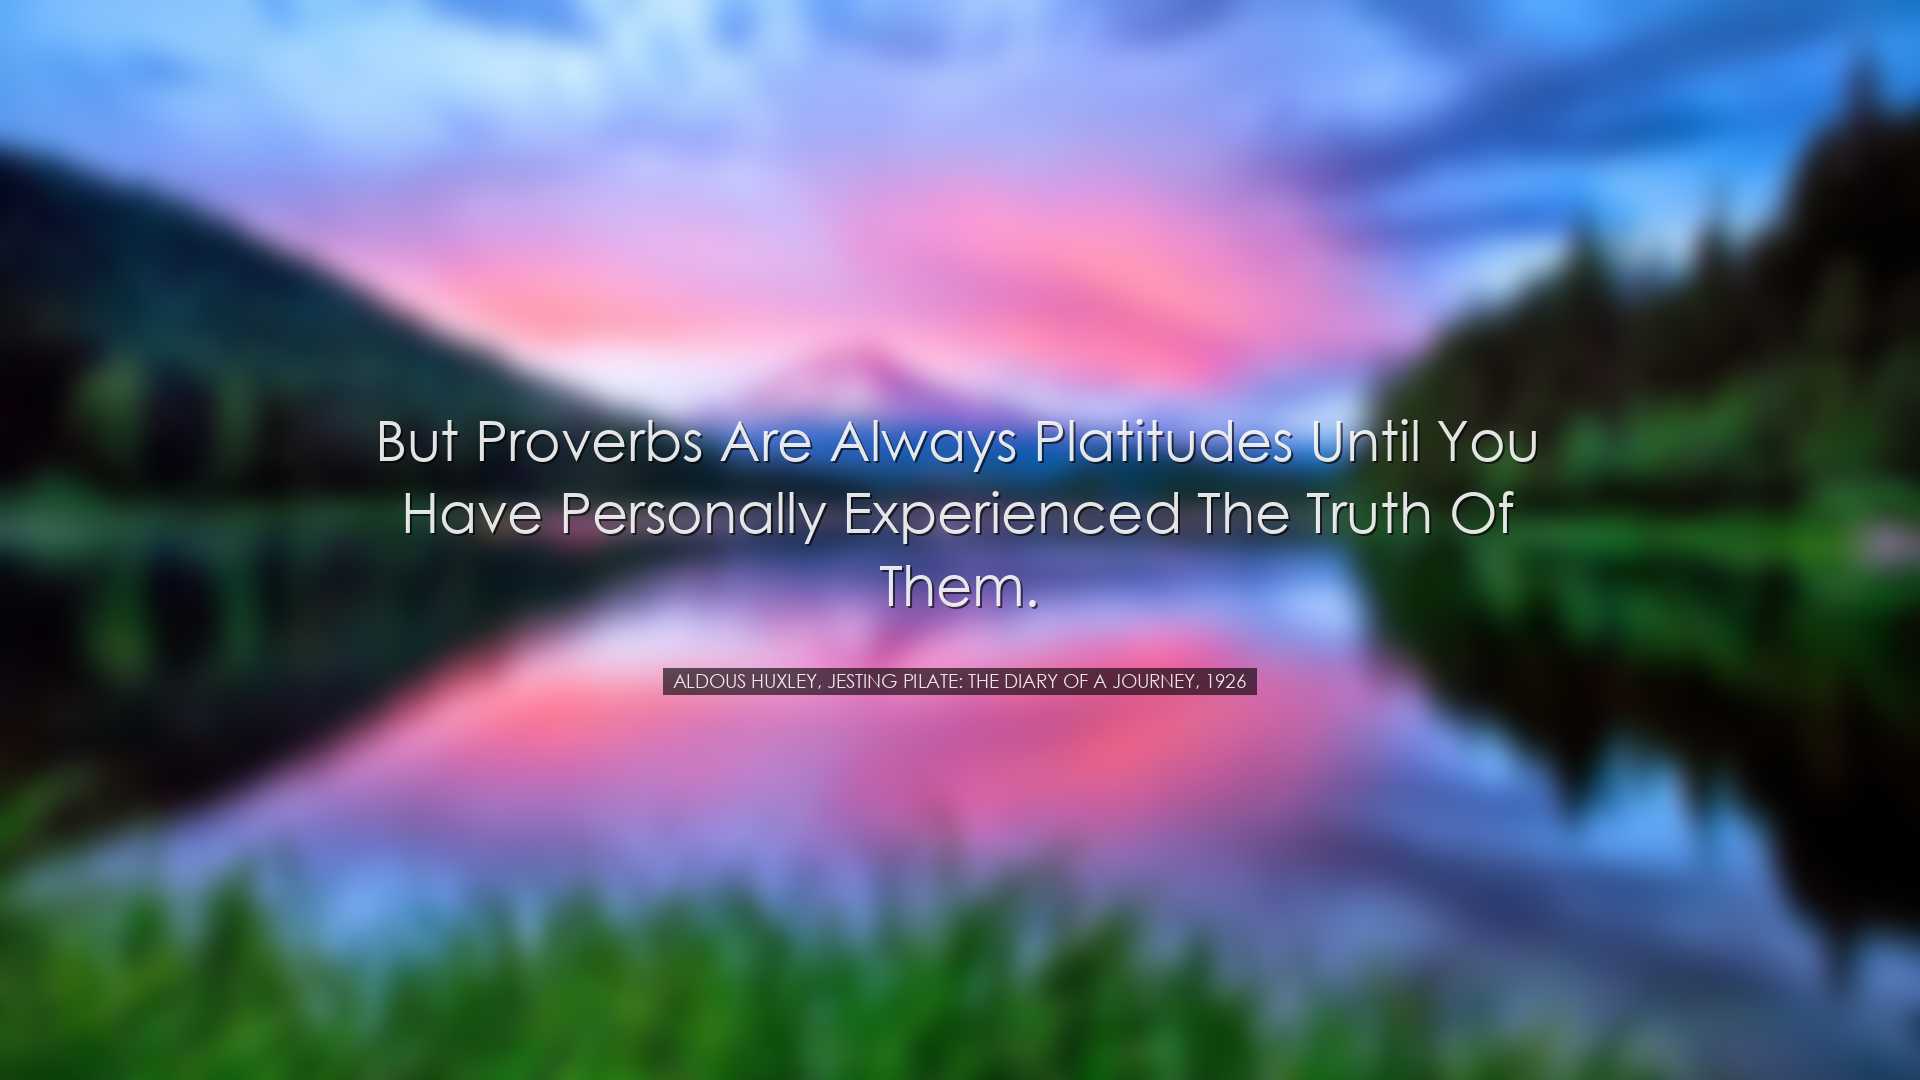 But proverbs are always platitudes until you have personally exper